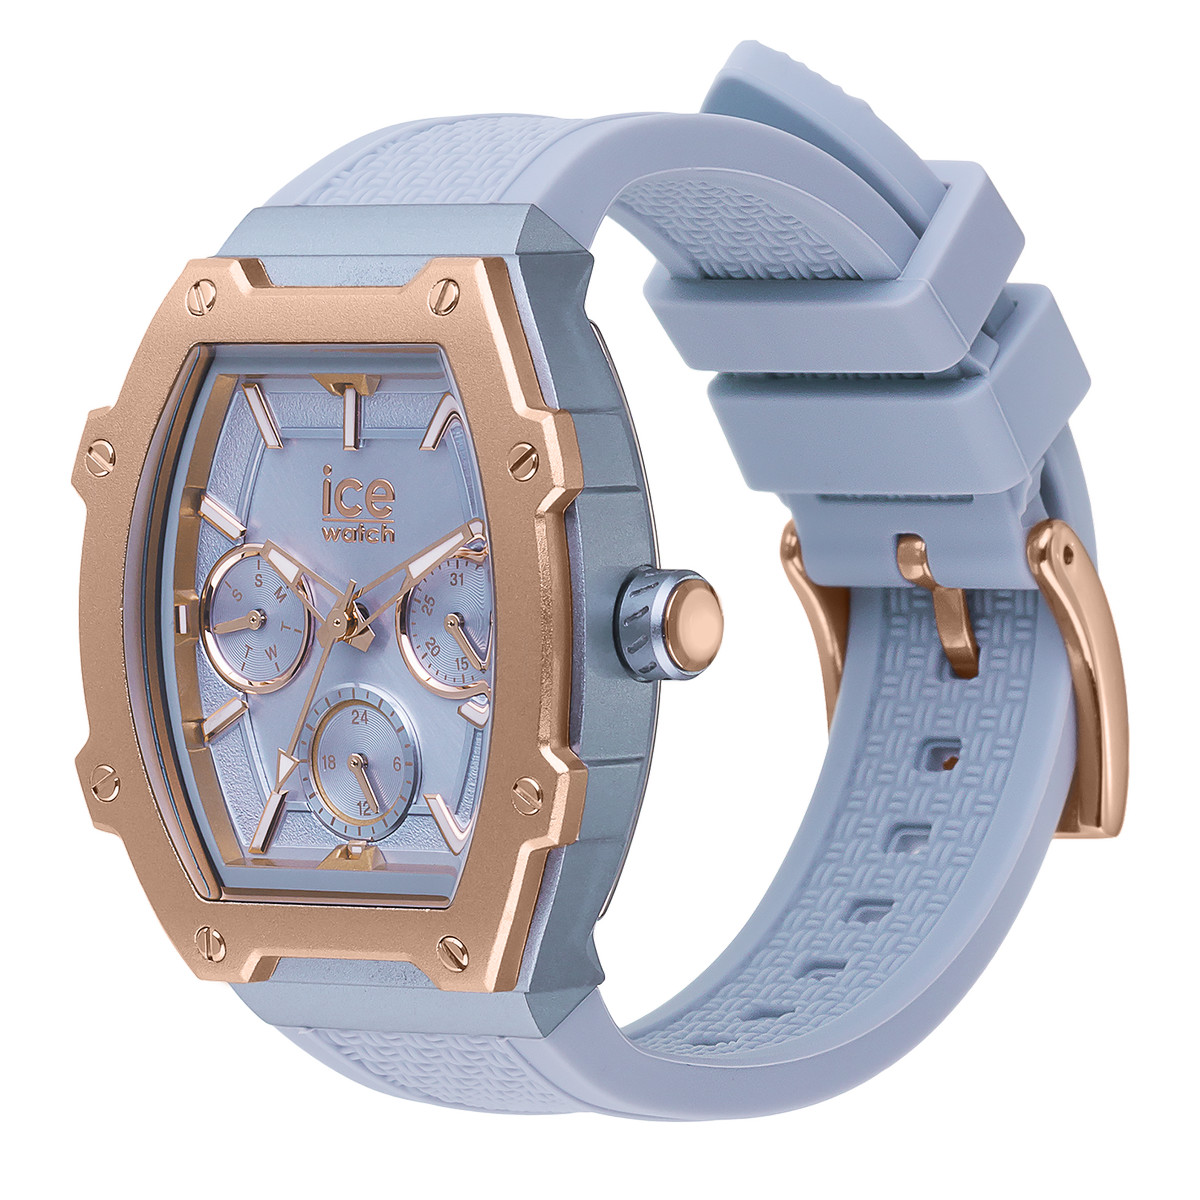 Montre ICE WATCH Ice boliday femme bracelet silicone bleu - vue D1